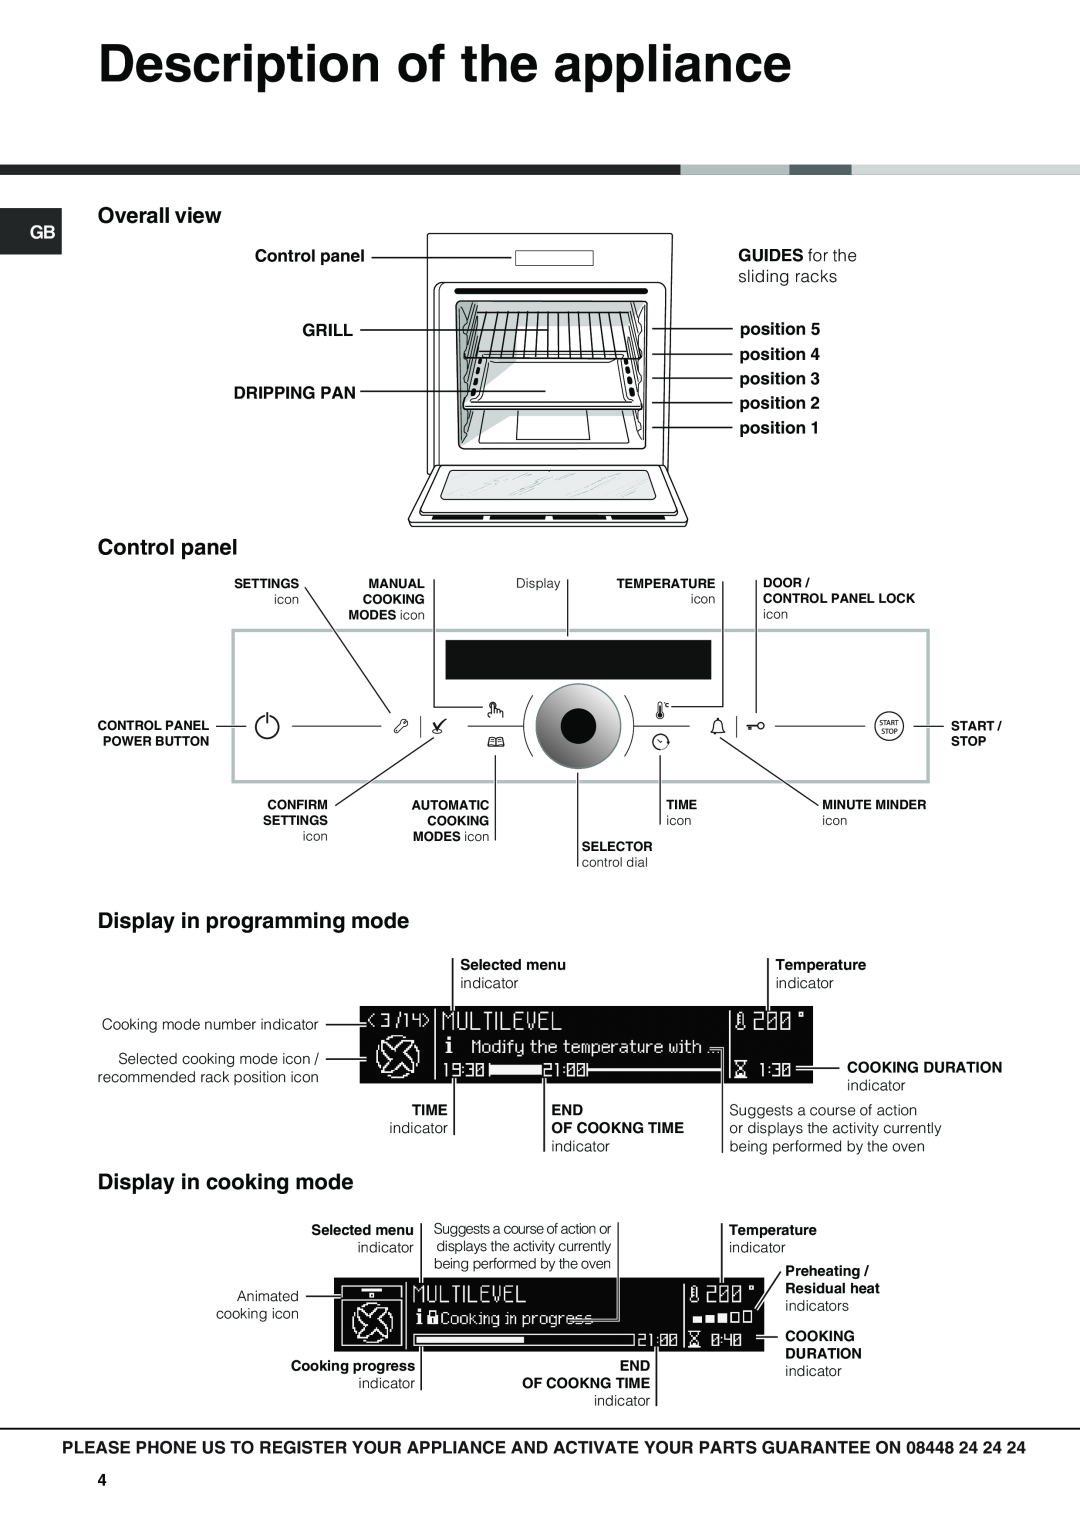 Hotpoint SX 1049L CX, SX 1049Q CX Description of the appliance, Overall view, Control panel, Display in programming mode 